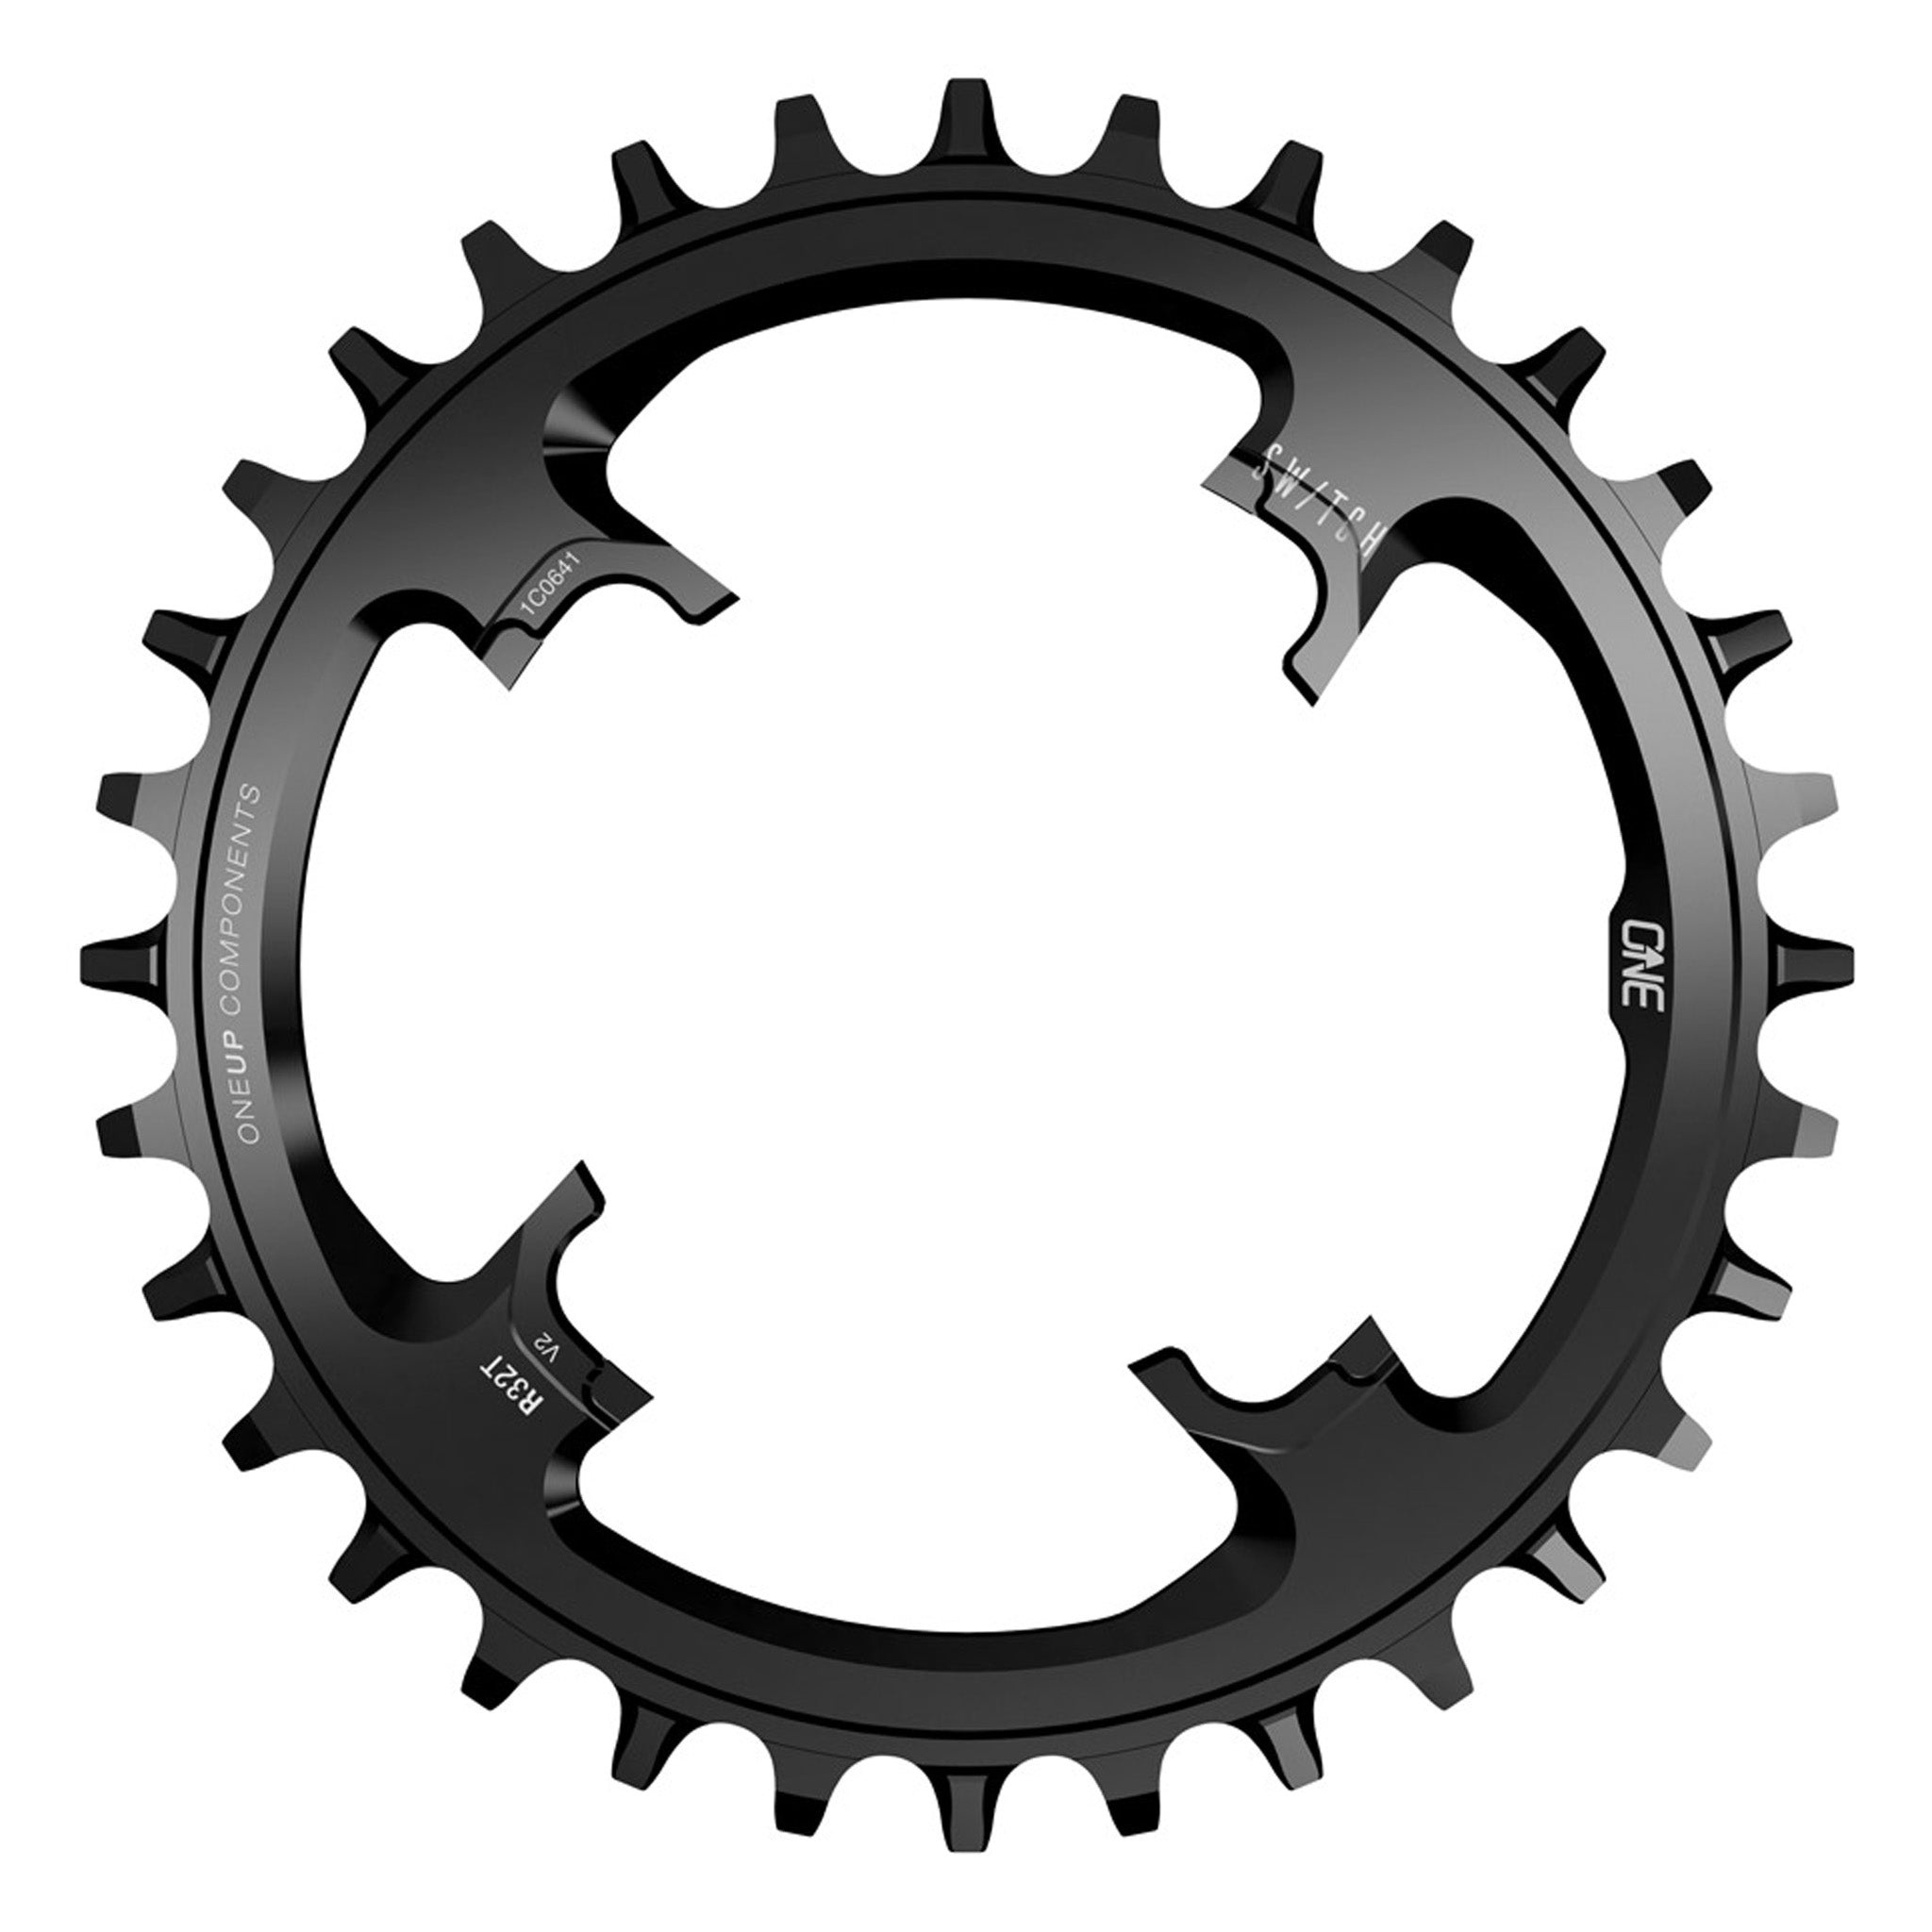 OneUp Components Switch Round V2 12sp Chainring 30t Black